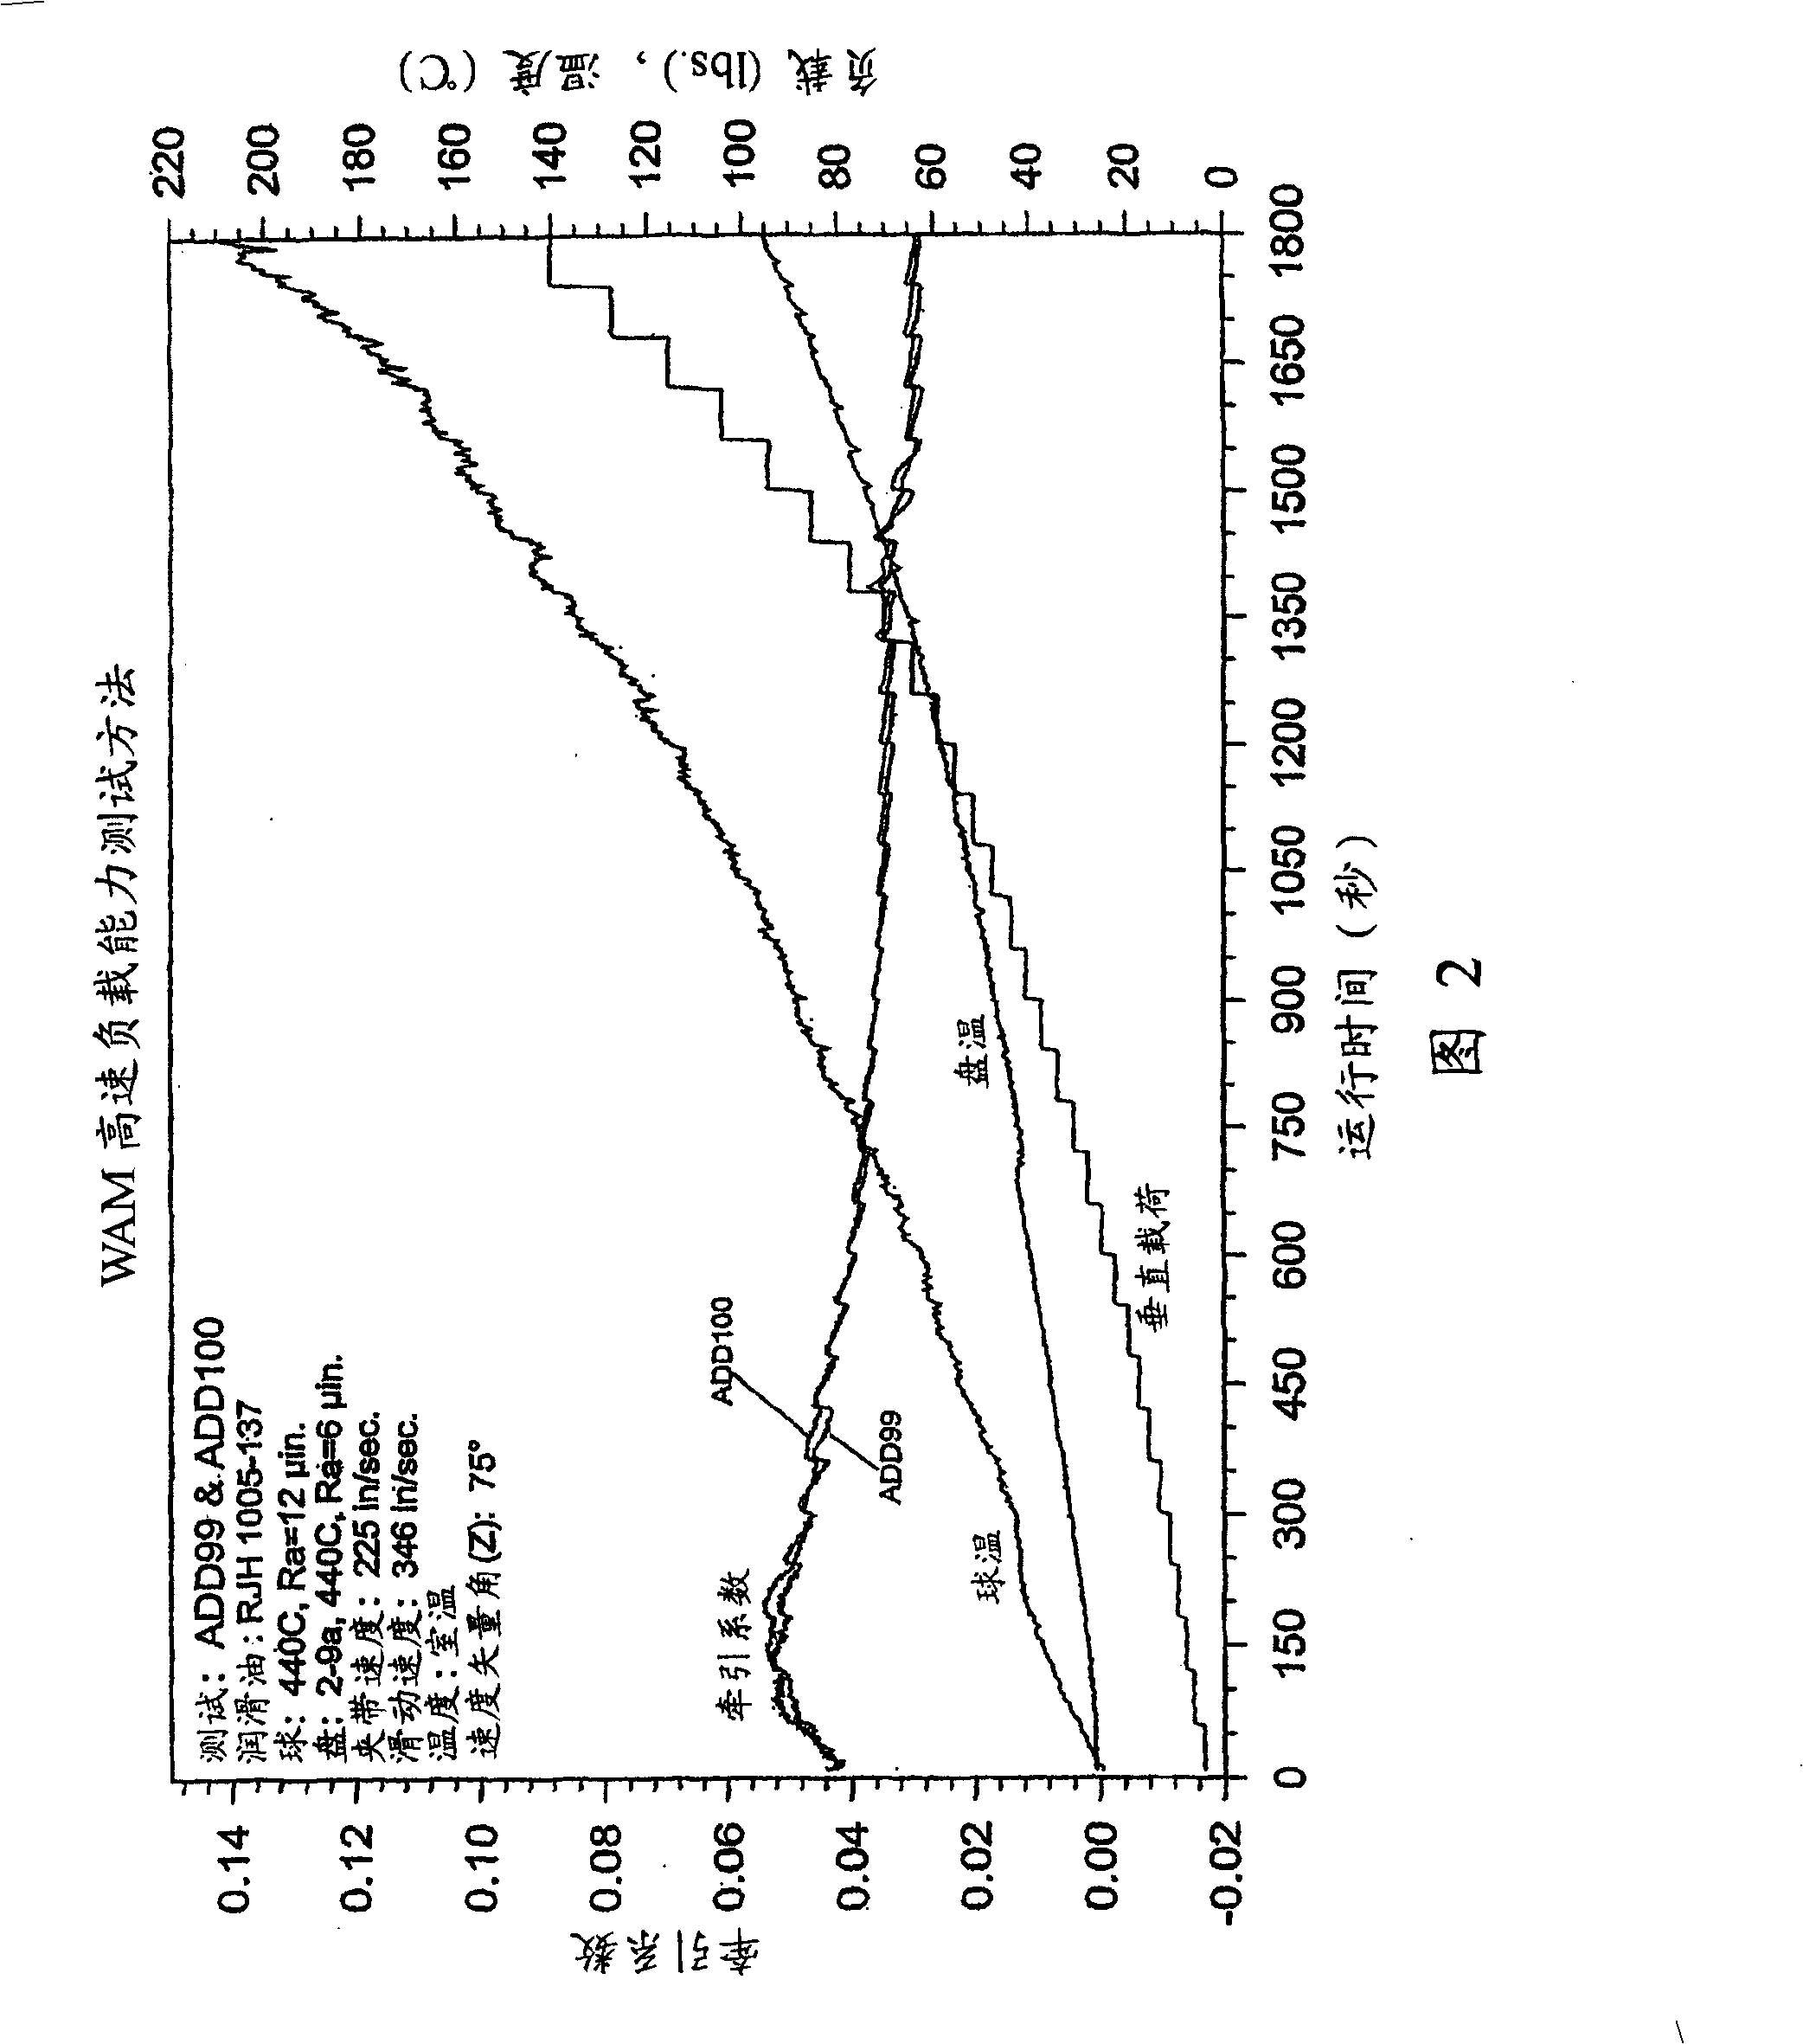 Lubricating compositions containing synthetic ester base oil, molybdenum compounds and thiadiazole-based compounds